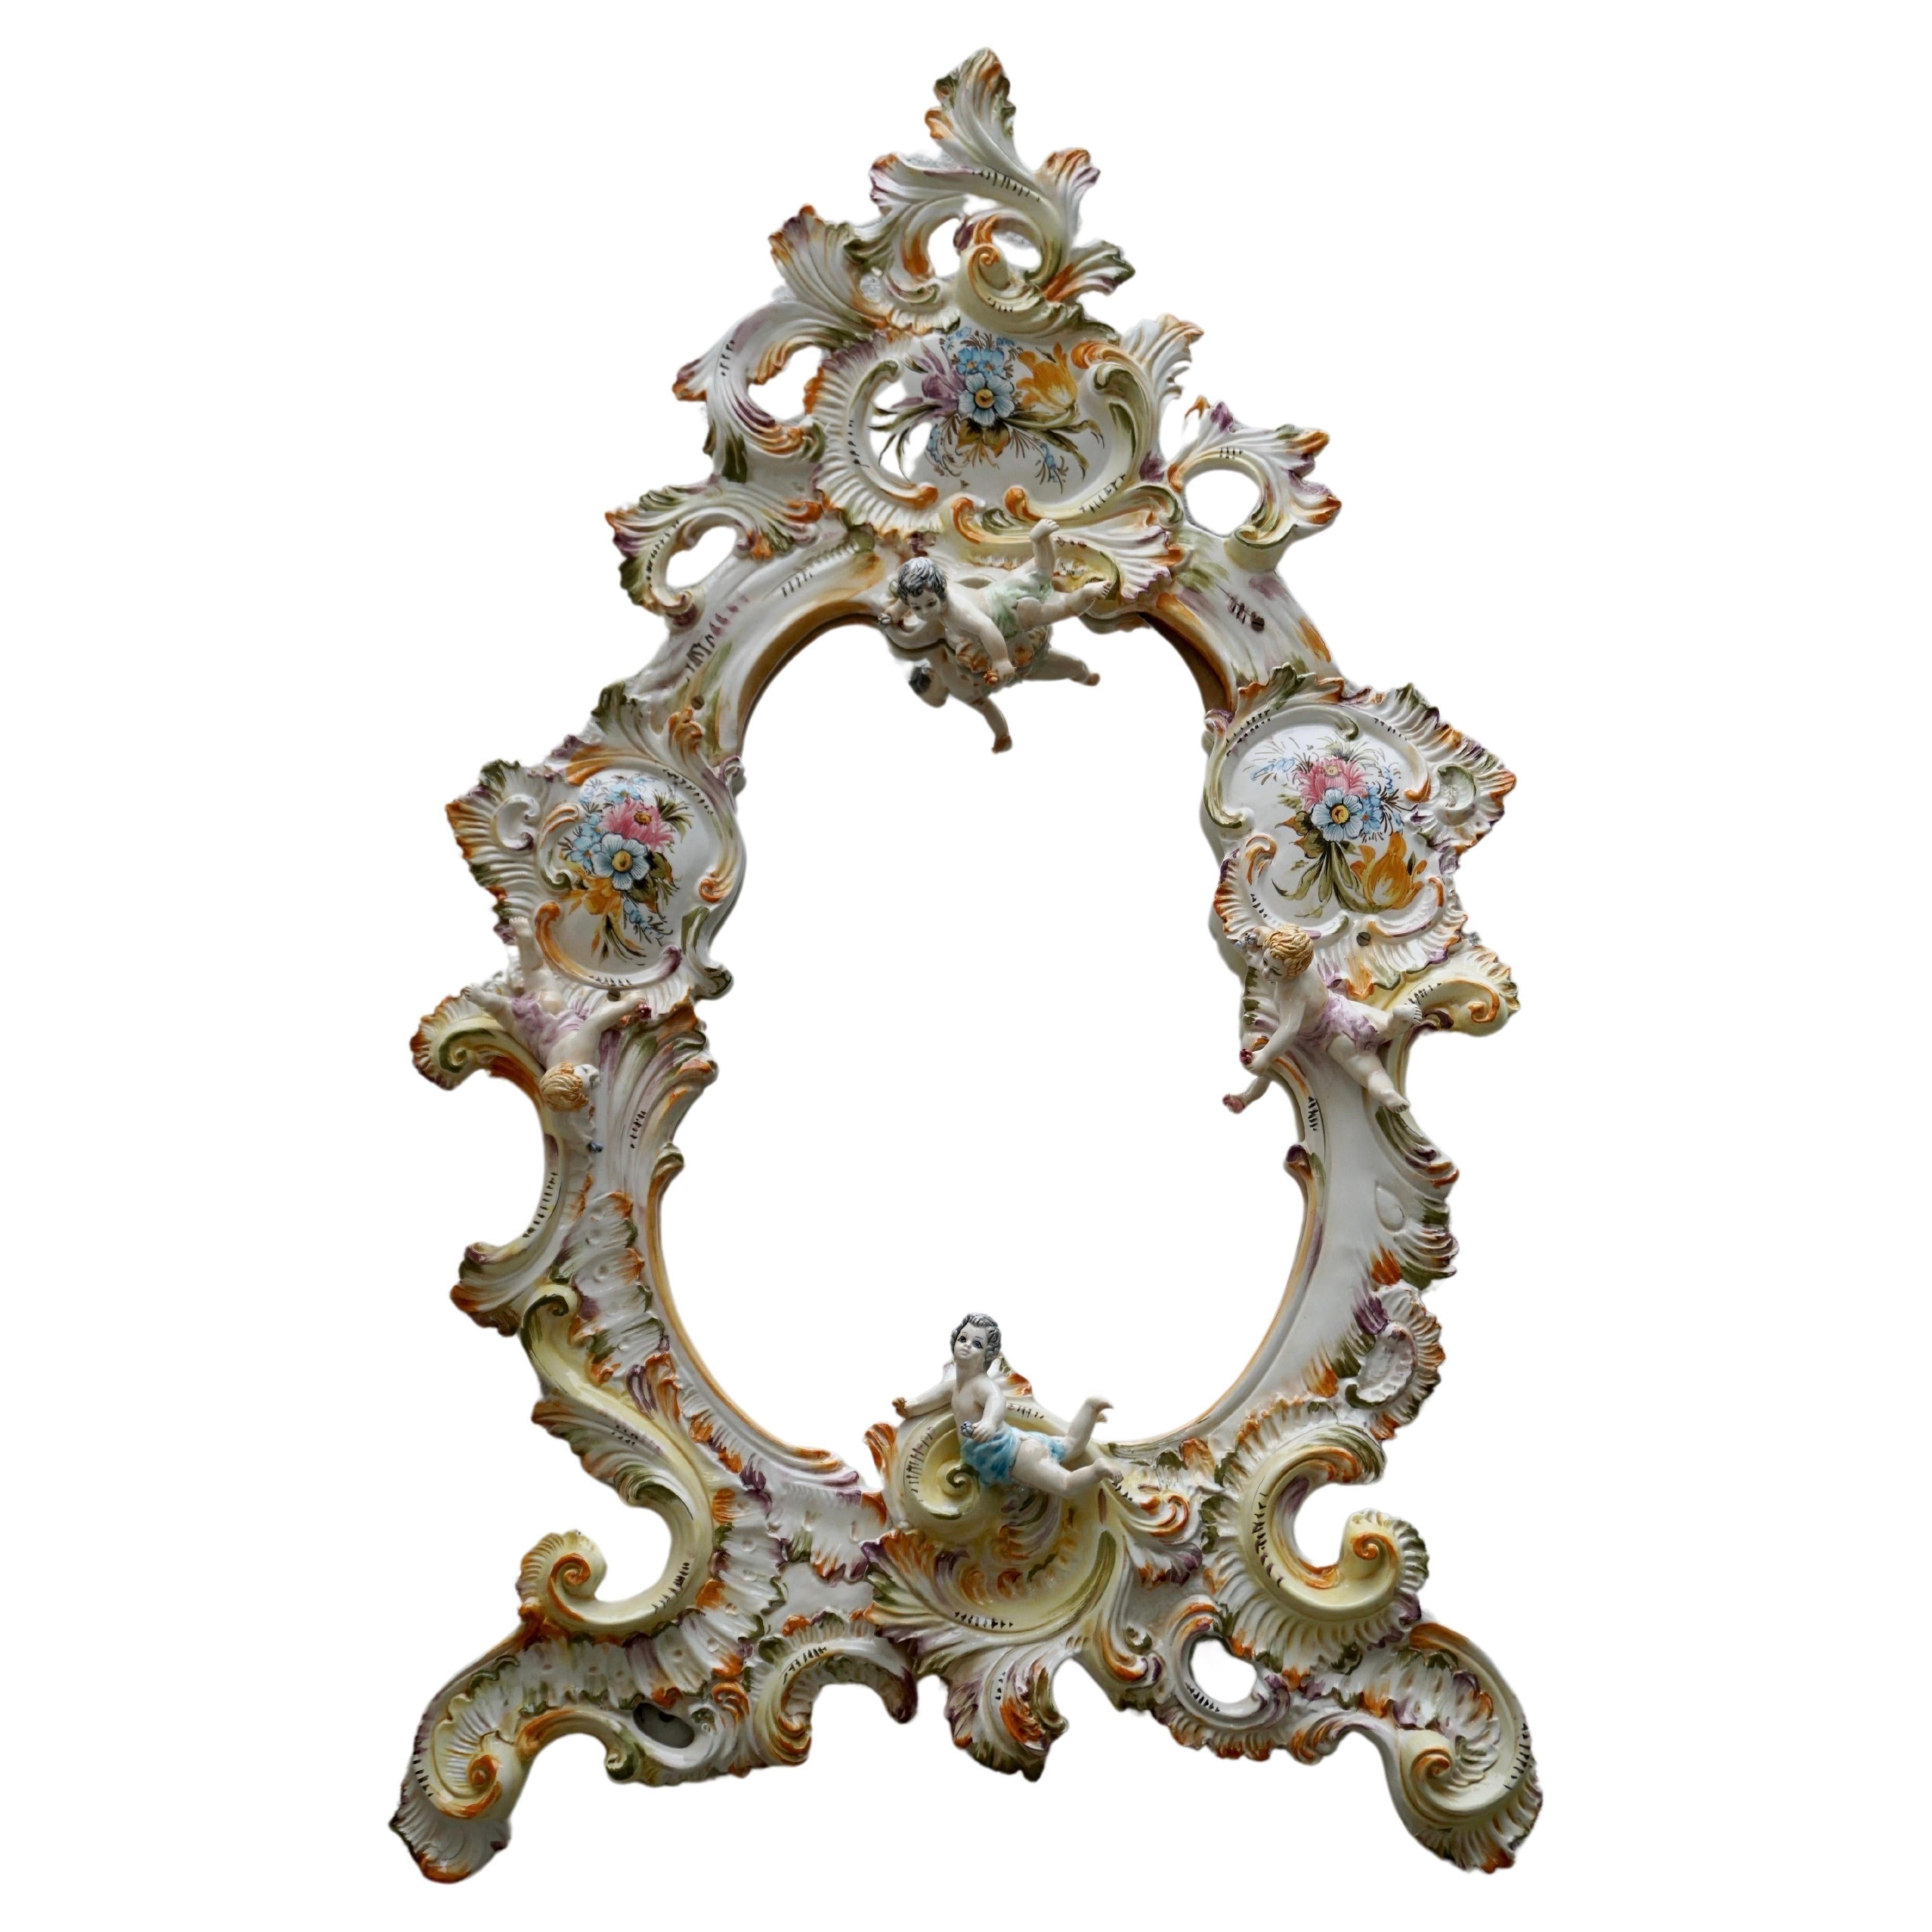 Large vintage Capodimonte style porcelain framed wall mirror and elaborately decorated with a variety of delicately crafted flowers and cherubs.
Italy, 1970s.

Height 44.8